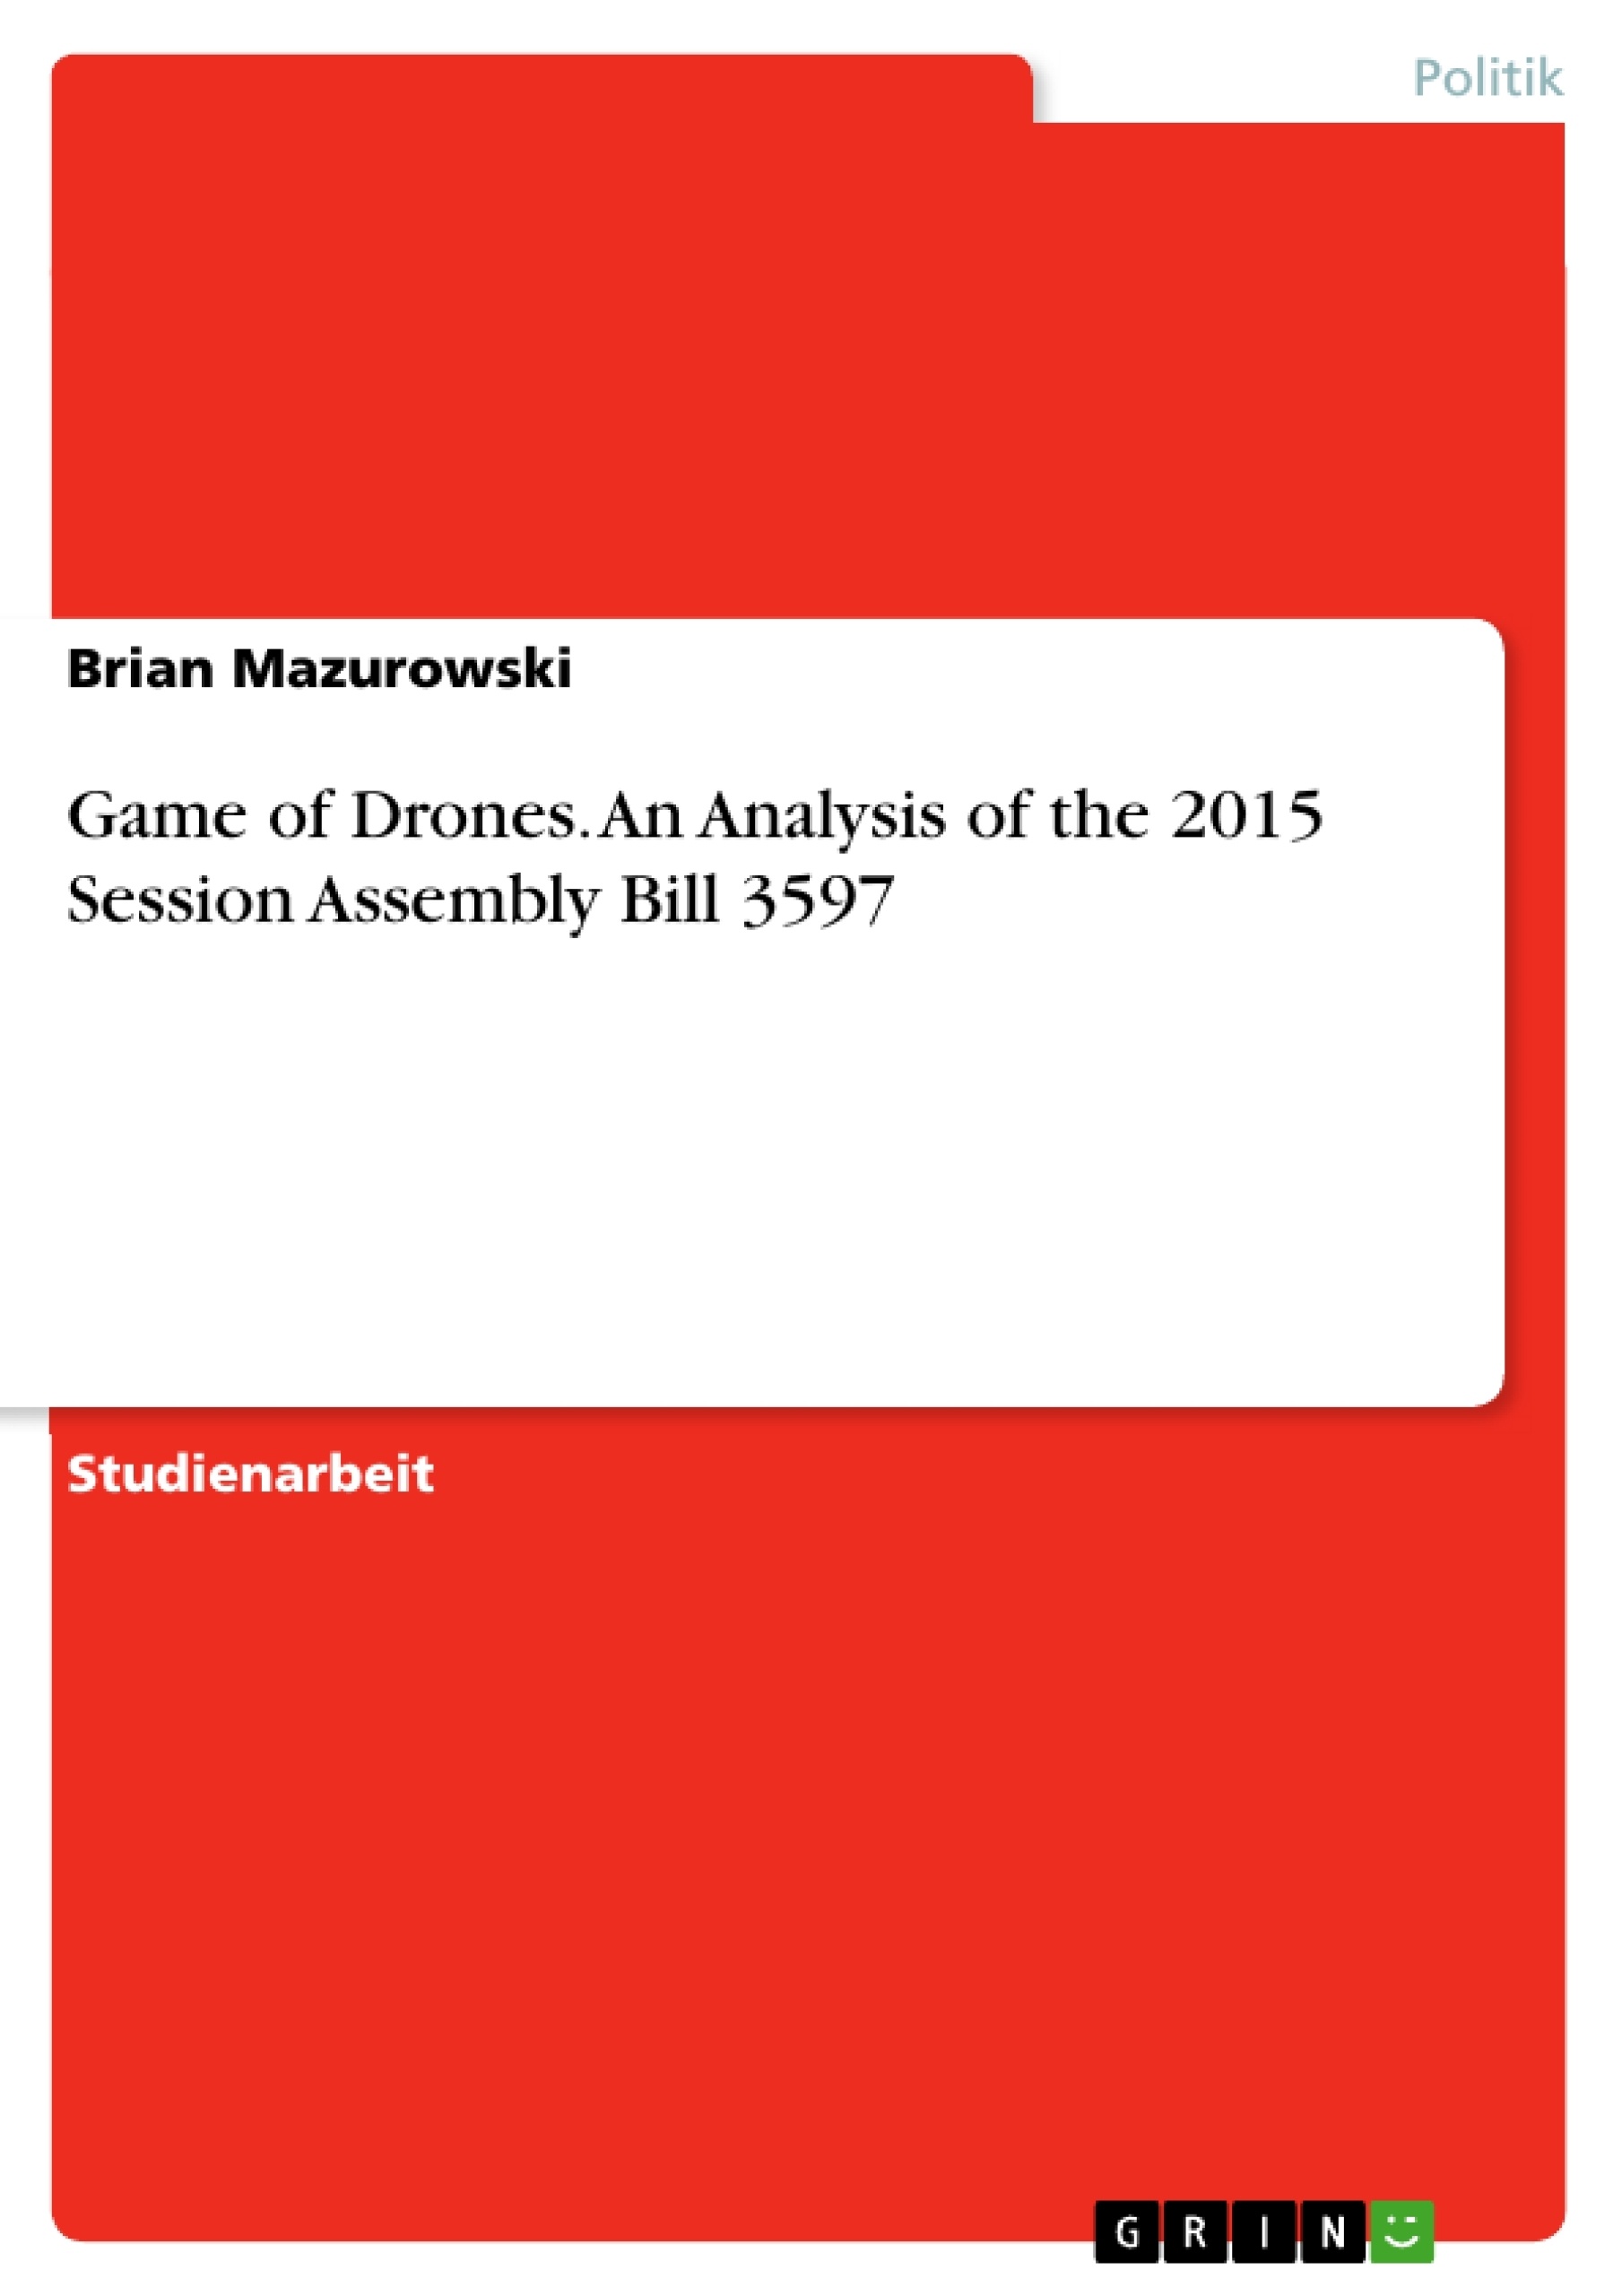 Titre: Game of Drones. An Analysis of the 2015 Session Assembly Bill 3597